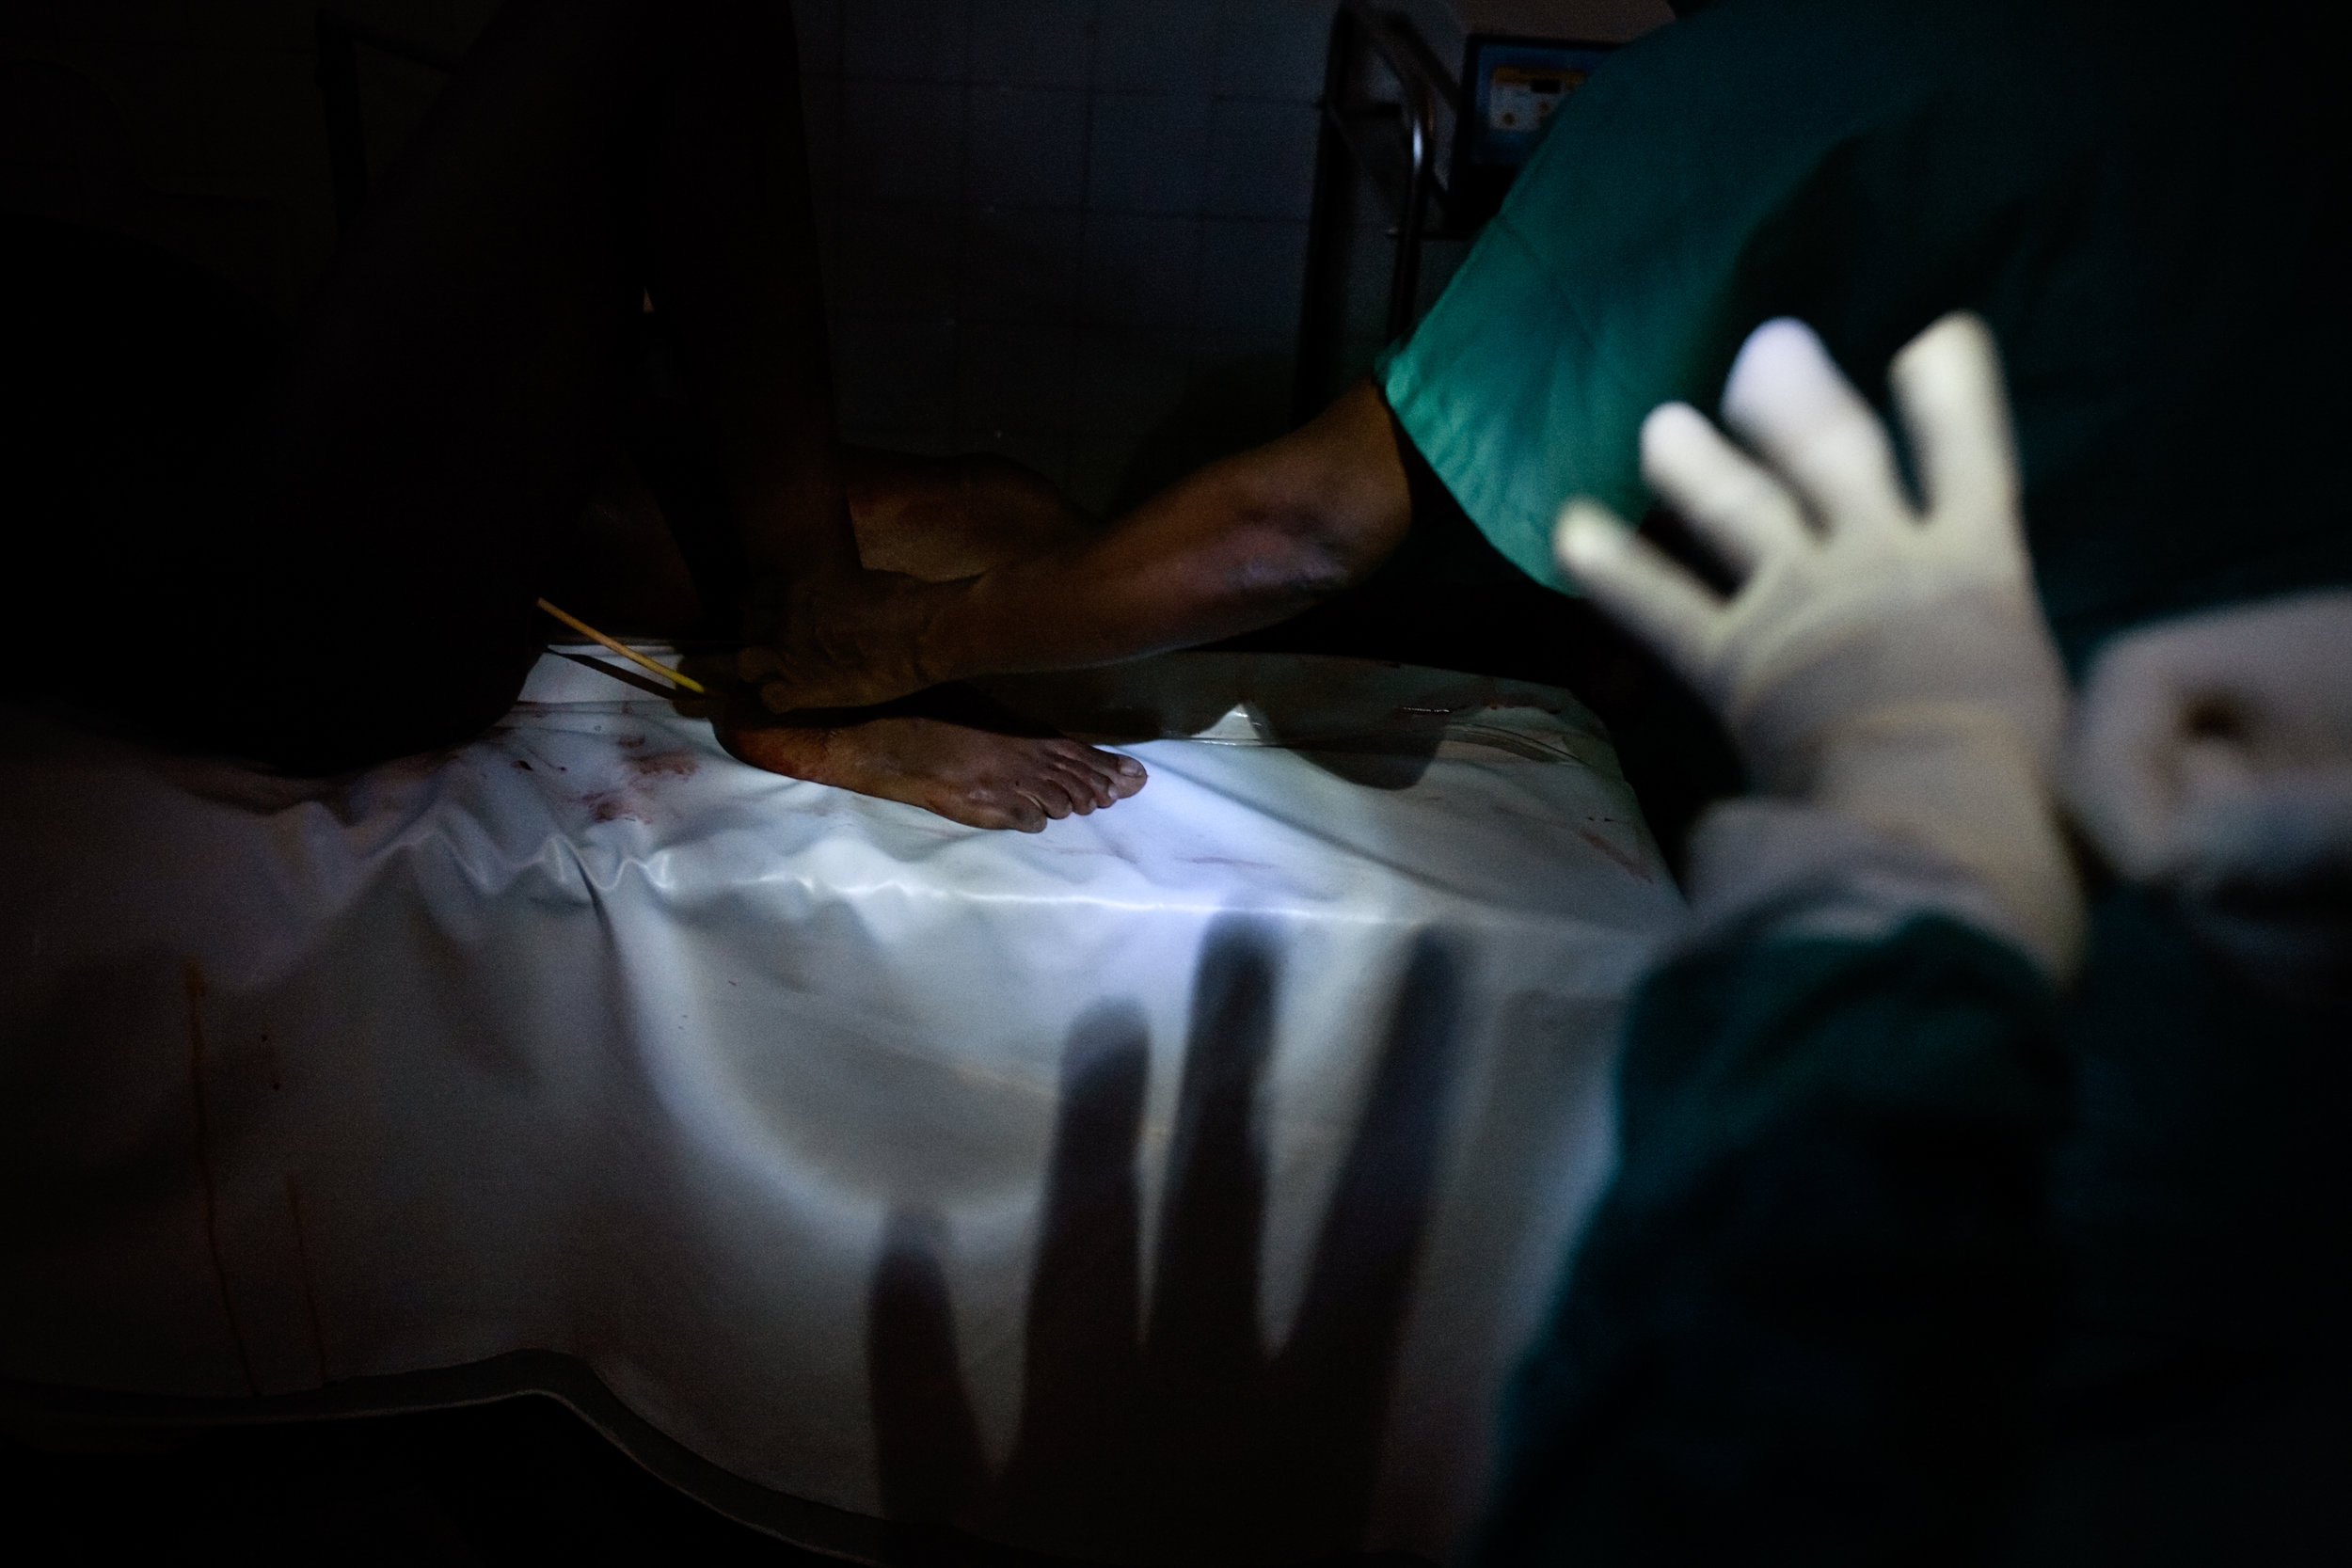  A surgical team performs a c-section during a power cut in Abobo Sud Hospital in Abidjan, Ivory Coast, April 18, 2011. A week after the end of the military standoff in Abidjan, very few hospitals were open. 